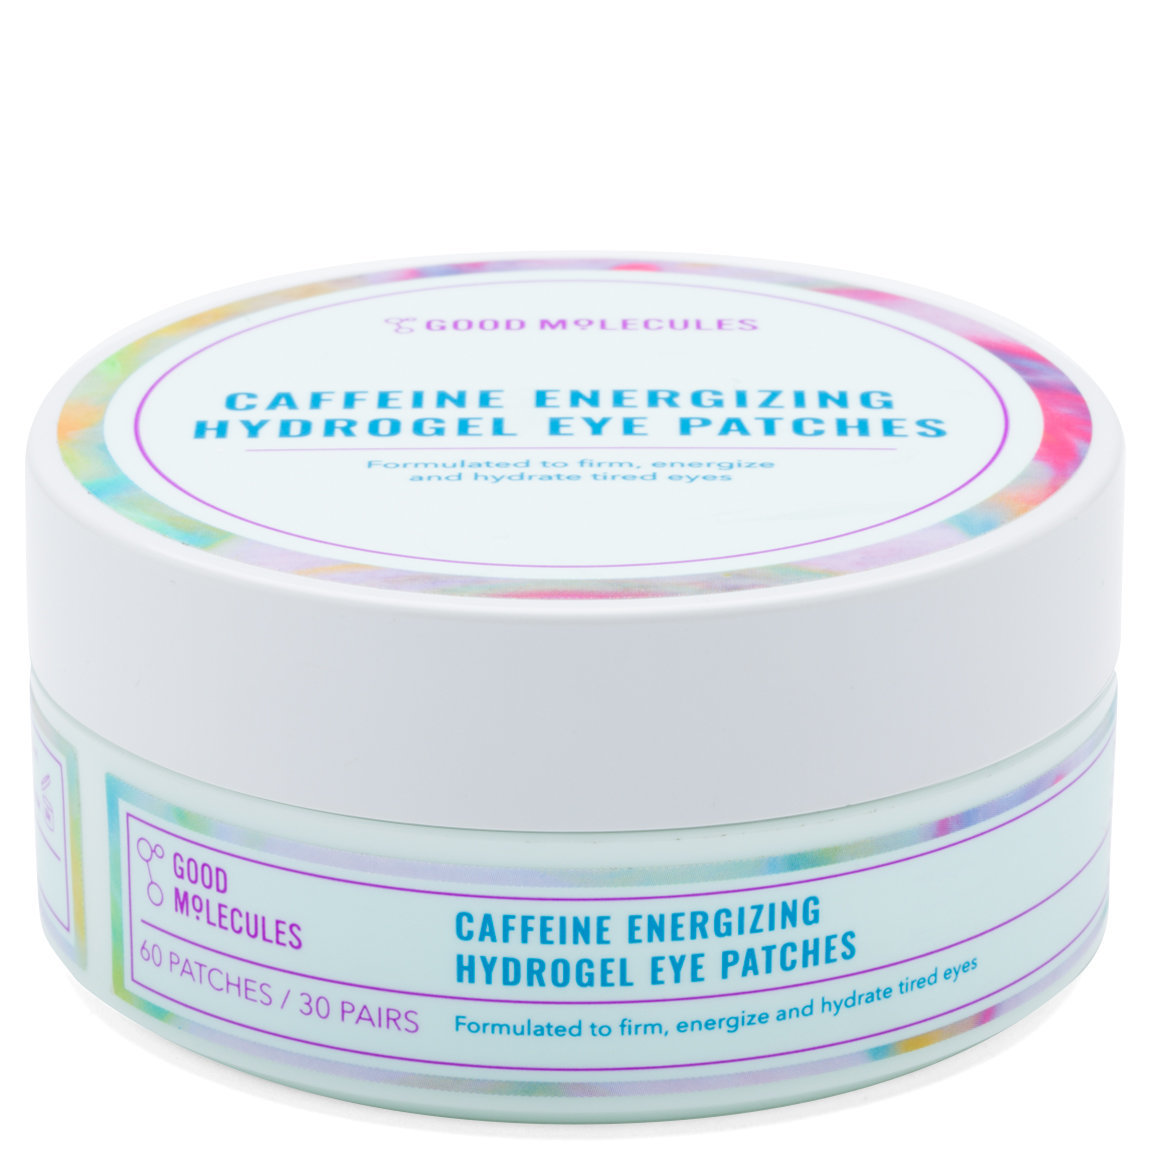 Good Molecules Caffeine Energizing Hydrogel Eye Patches Single alternative view 1 - product swatch.